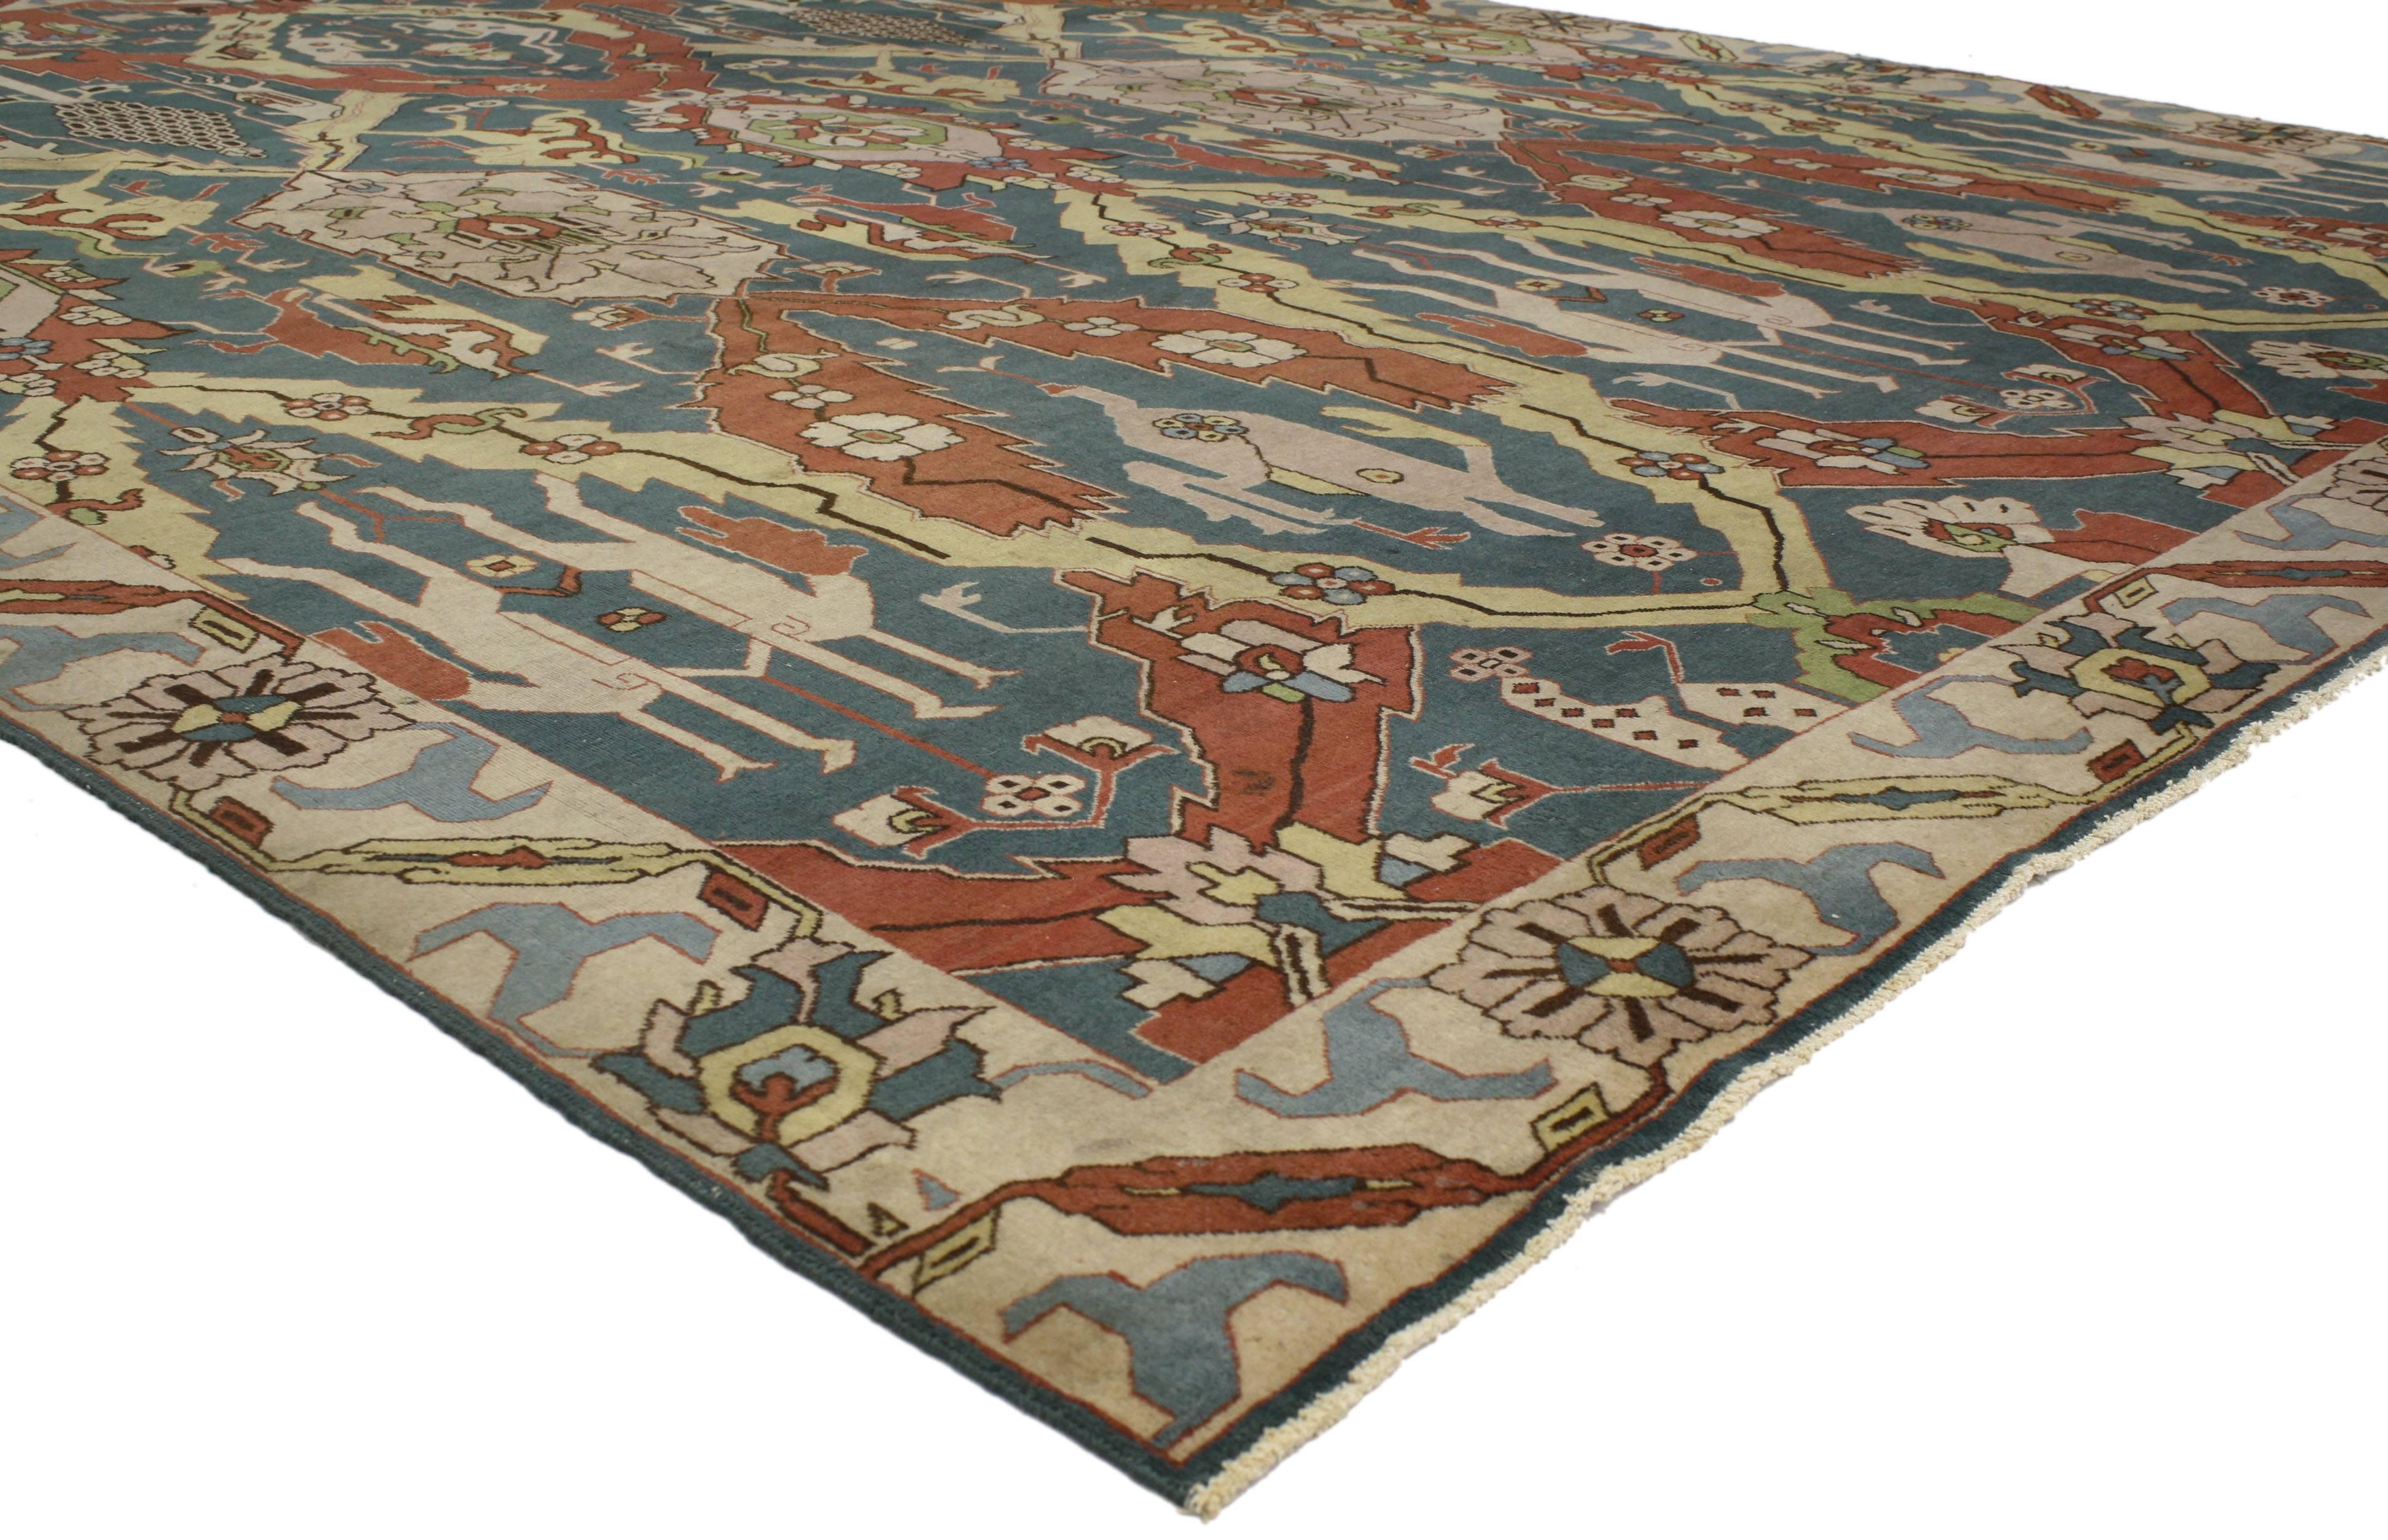 Hand-Knotted Antique Persian Tabriz Rug with Modern Art Deco Style, Petag Tabriz Rug